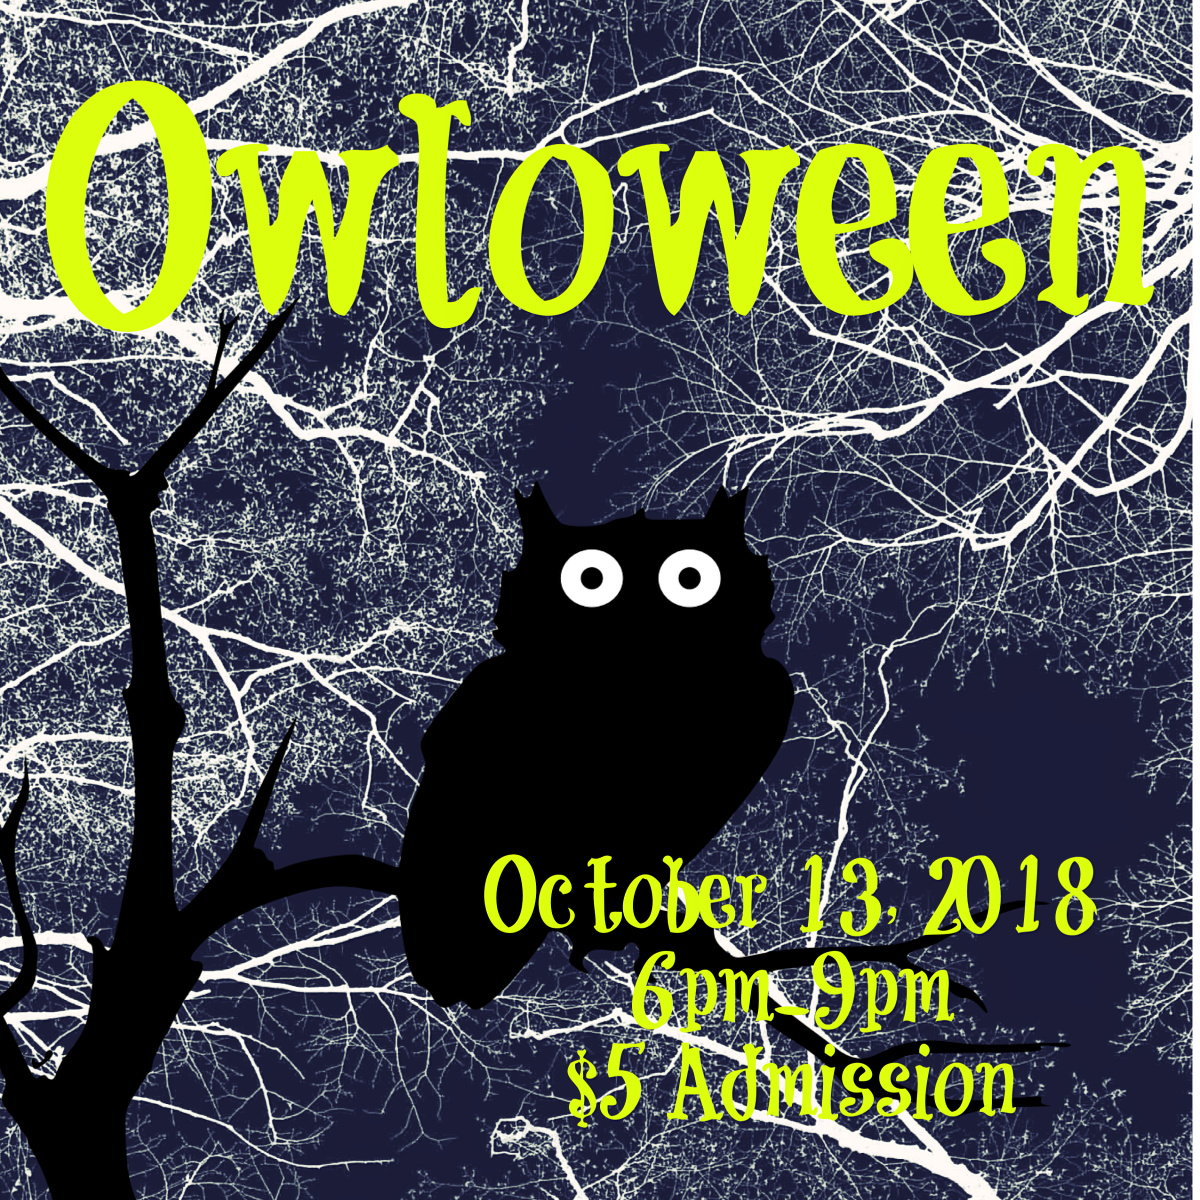 Owloween October 13, 2018 6pm-9pm $5 Admission